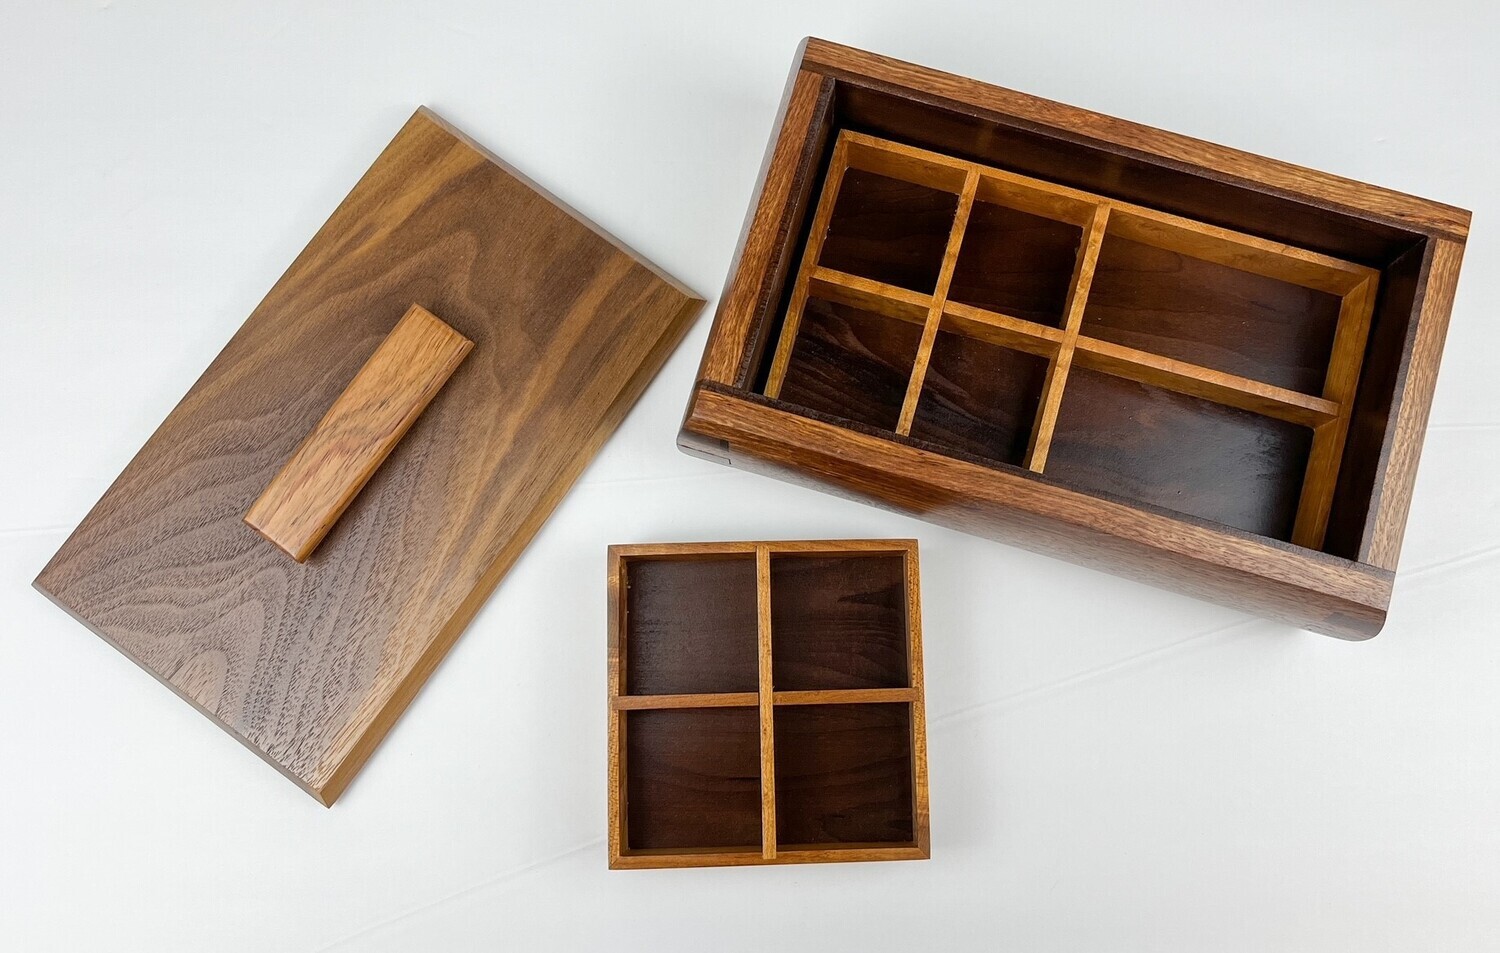 Jewellery/Keepsake Wooden Boxes with Trays, Option: A- Caribbean Rosewood, Mesquite Liner/ Black Walnut Lid with Rosewood Handle 10x6.5x3"